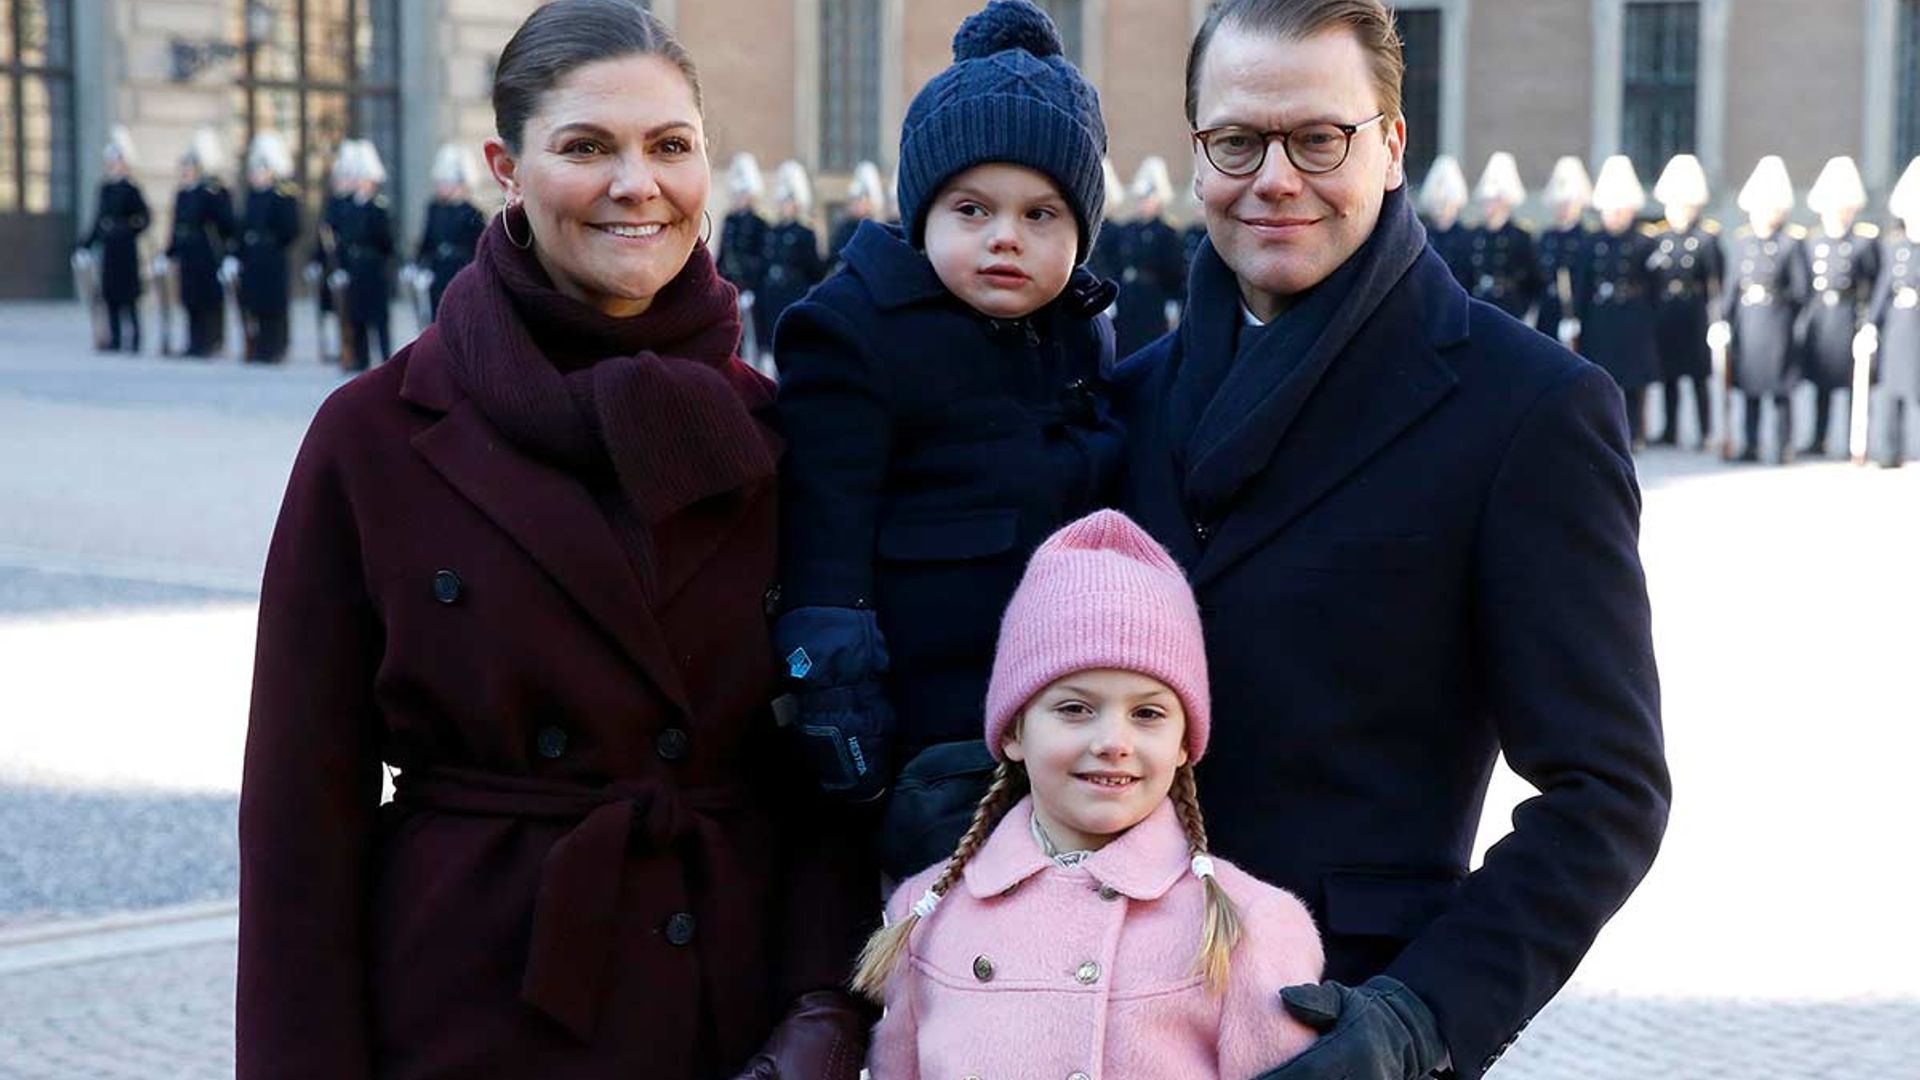 Celebrity daily edit: Princess Estelle and Prince Oscar's Christmas greeting - video